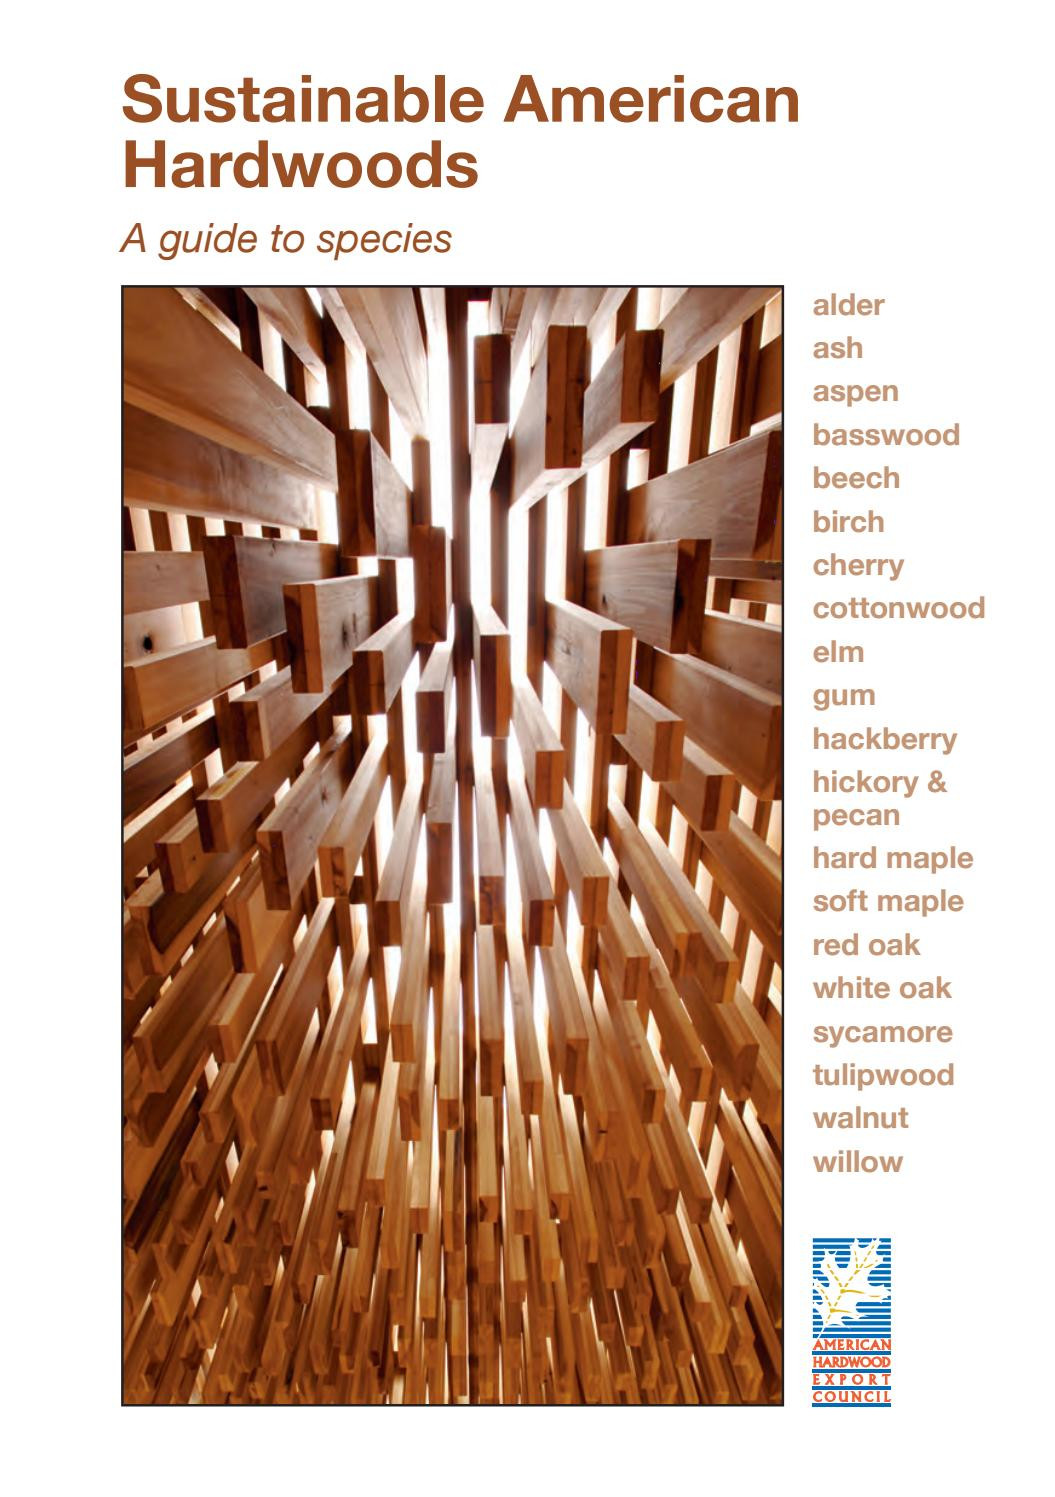 12 Nice Wormy Maple Hardwood Flooring 2024 free download wormy maple hardwood flooring of sustainable american hardwoods a guide to species by american within sustainable american hardwoods a guide to species by american hardwood export council is